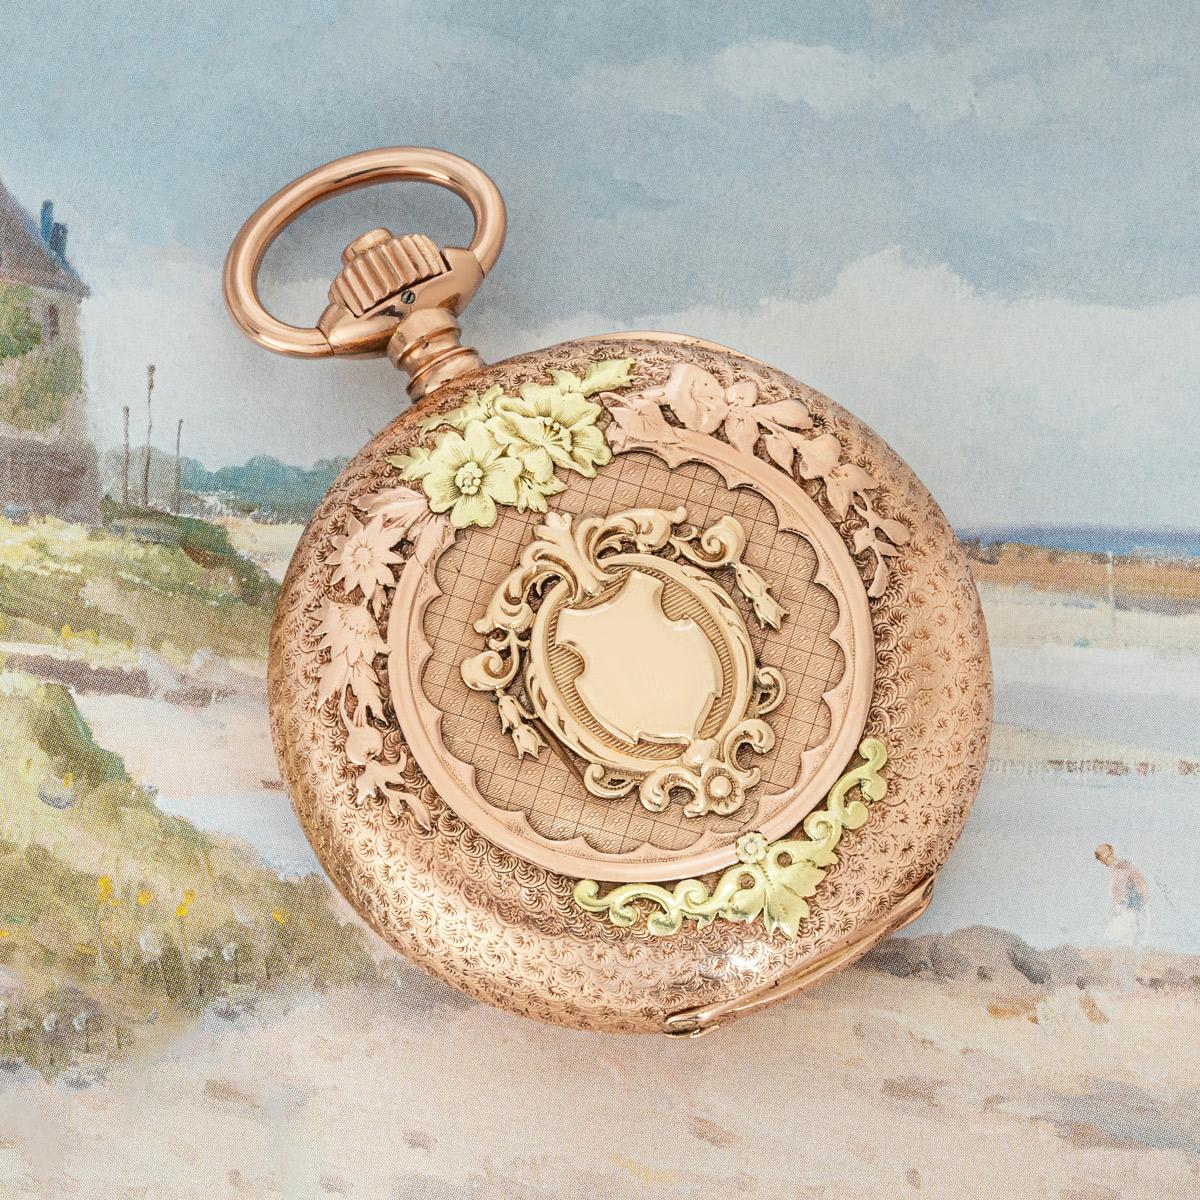 Longines. A Rare Hunting Festival Rose Gold Full Hunter Pocket Watch C1900 For Sale 1